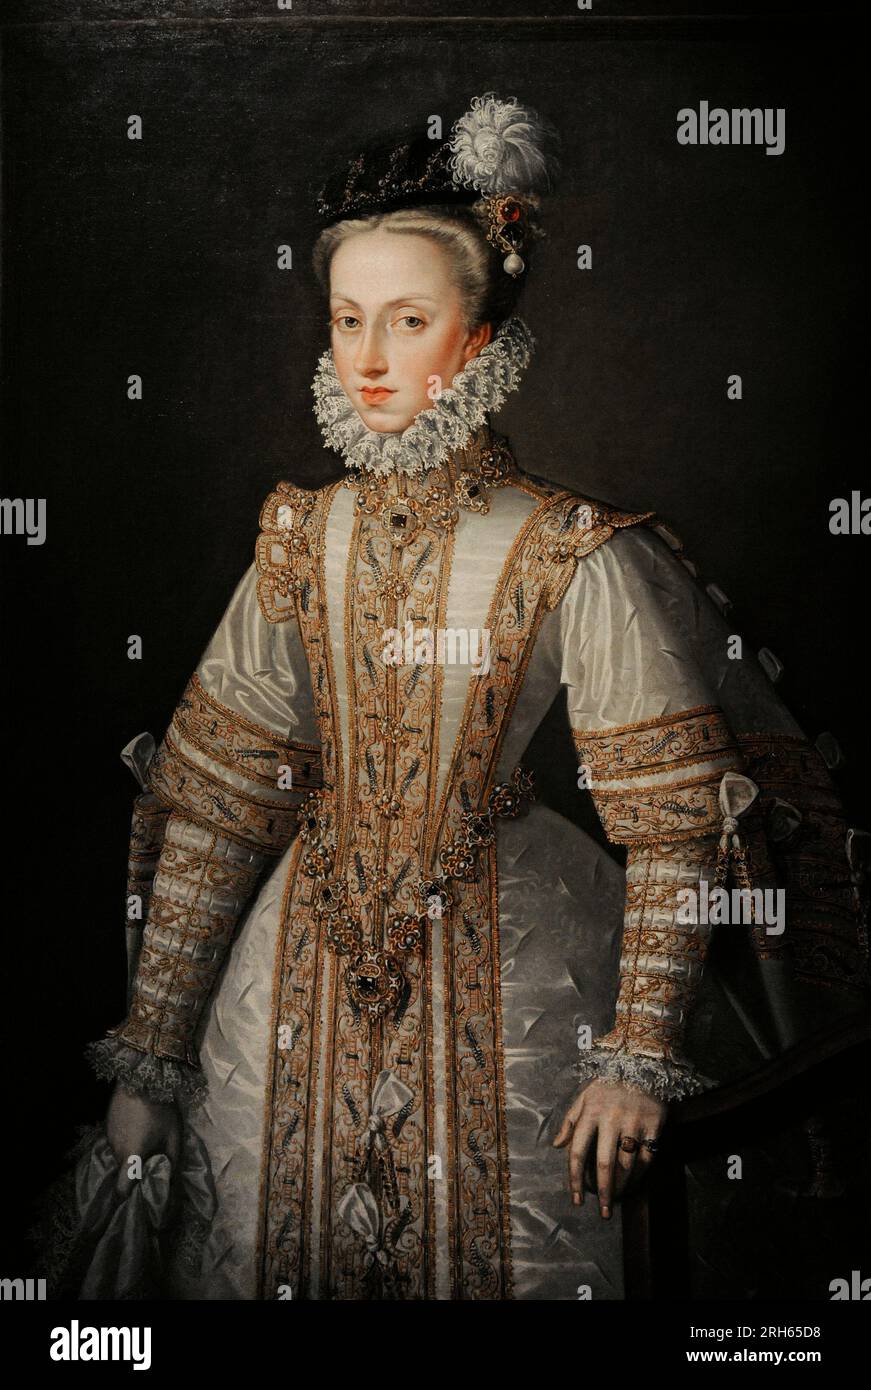 Anne of Austria (1549-1580). Queen of Spain, fourth wife of King Philip II. Portrait by Alonso Sanchez Coello (1531-1588), ca.1571. Lazaro Galdiano Museum, Madrid, Spain. Stock Photo